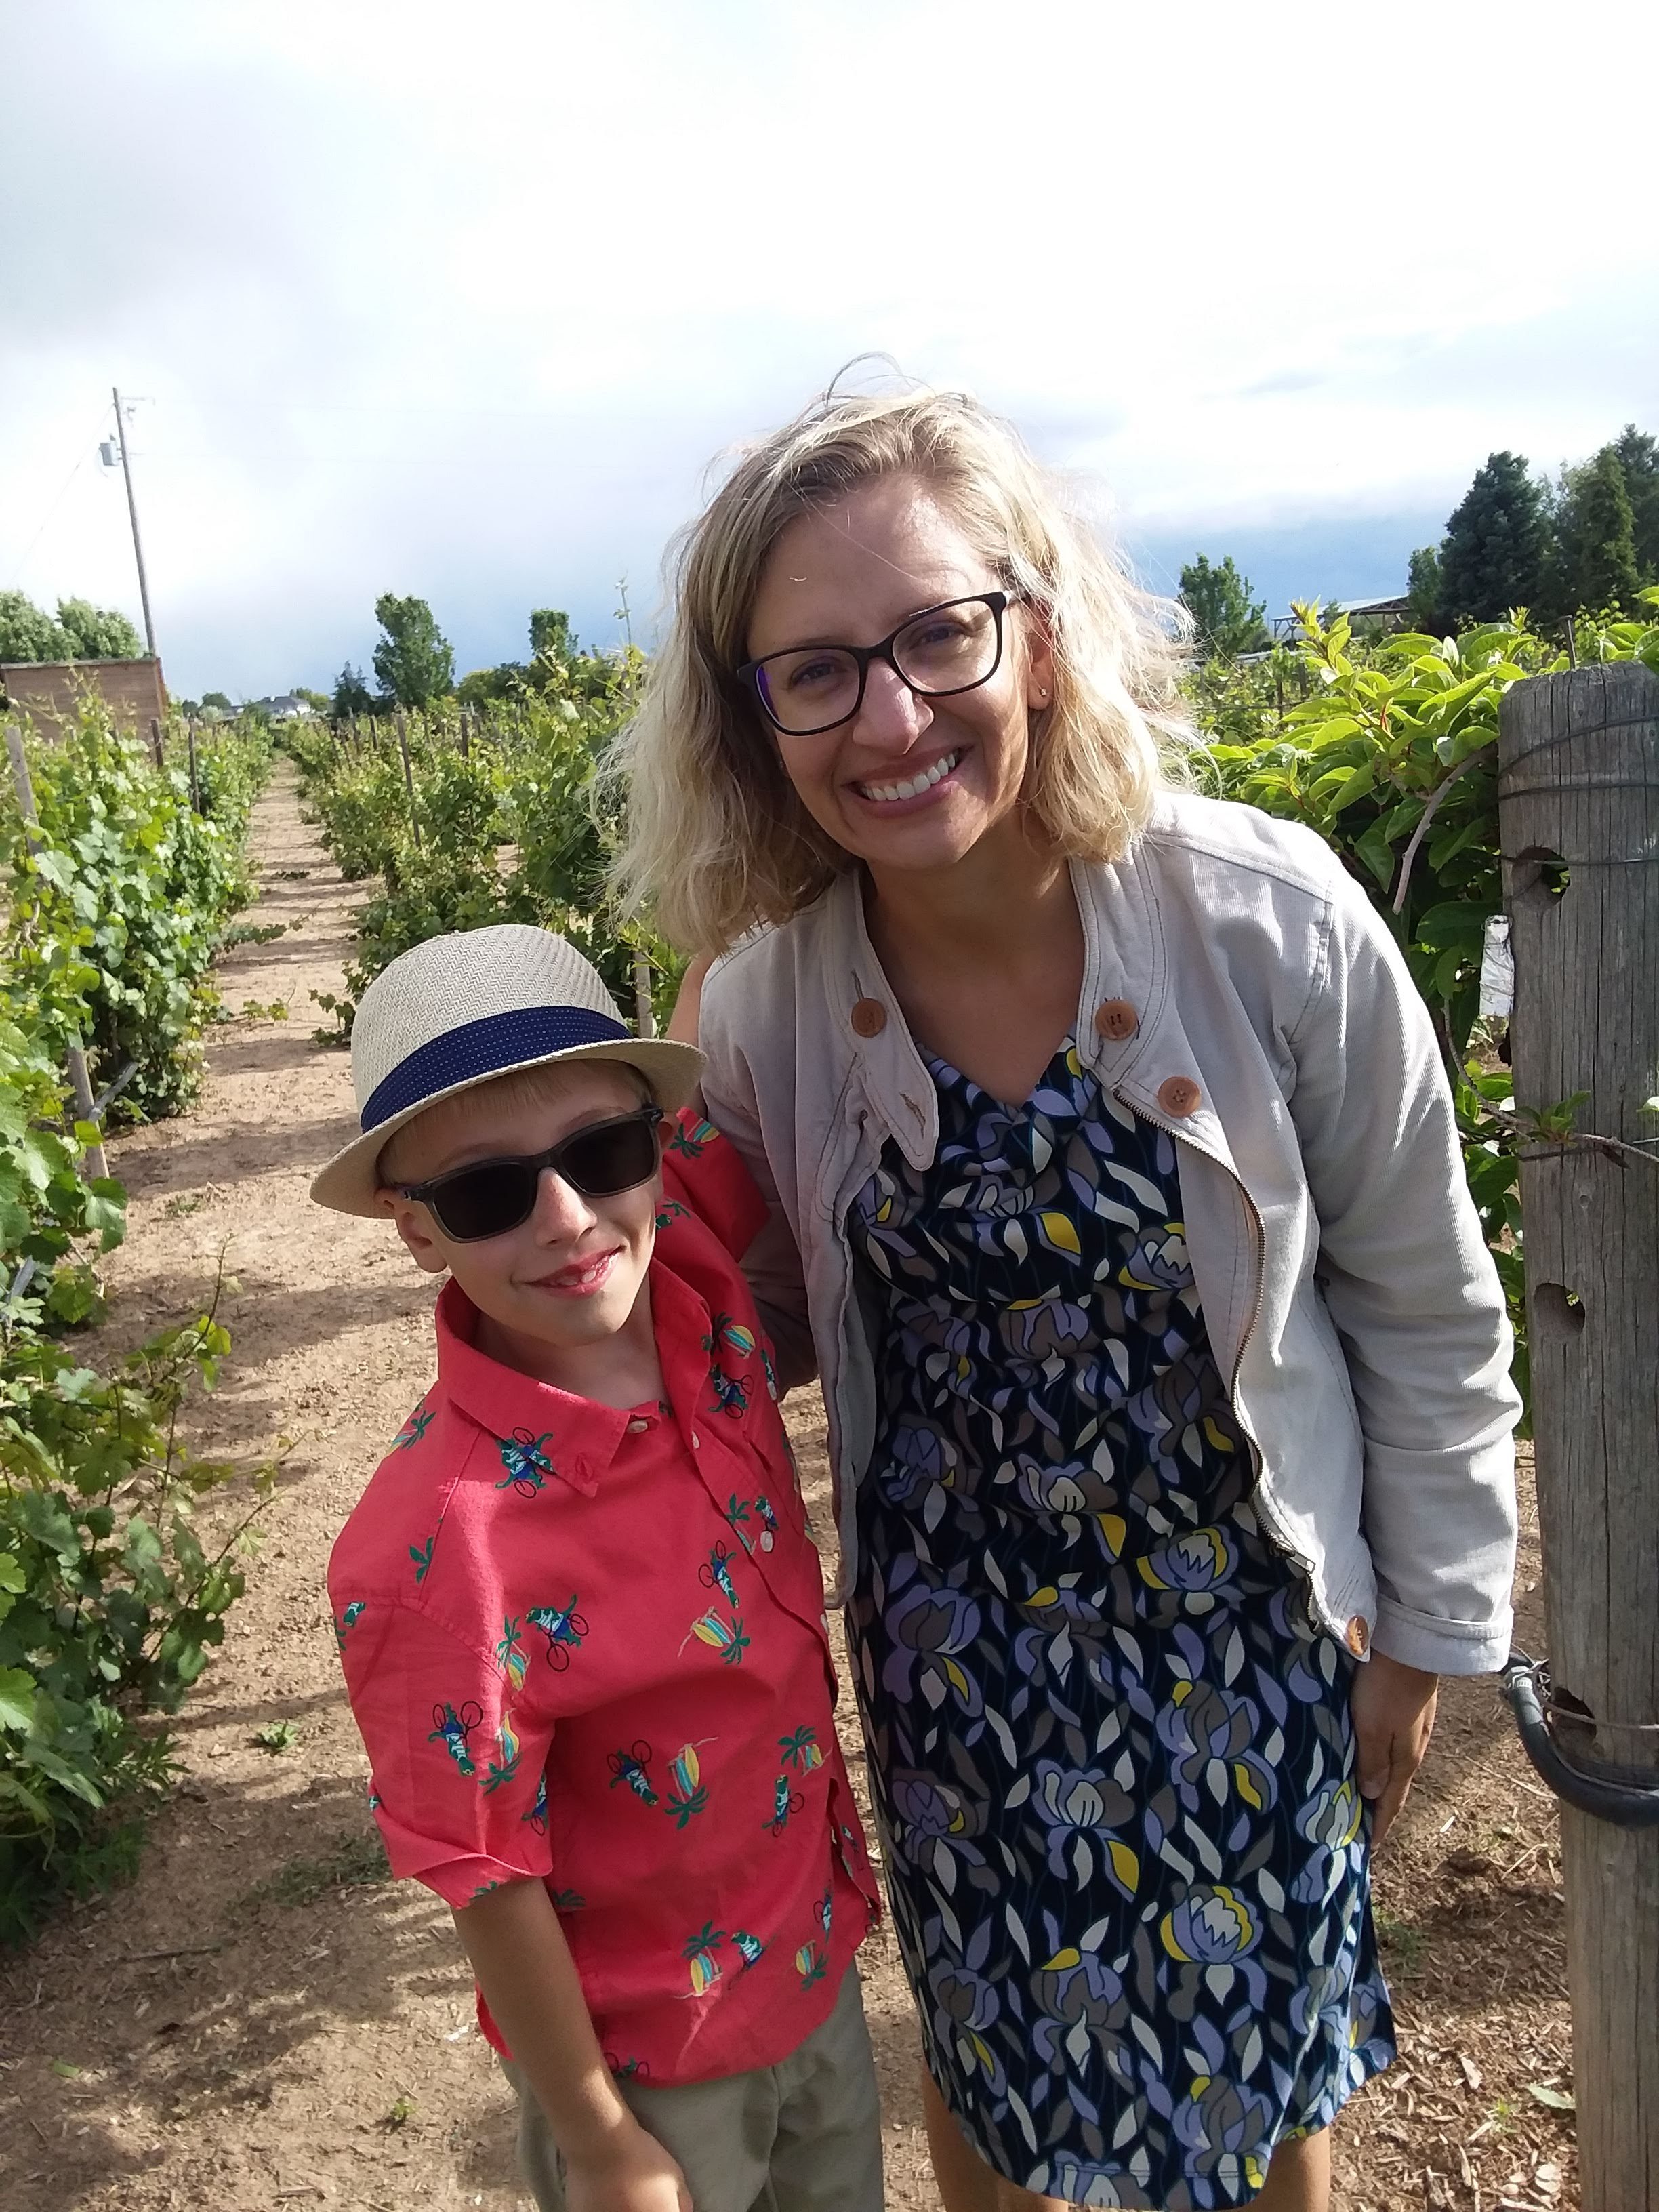 Casie Cook visits a farm with her son.